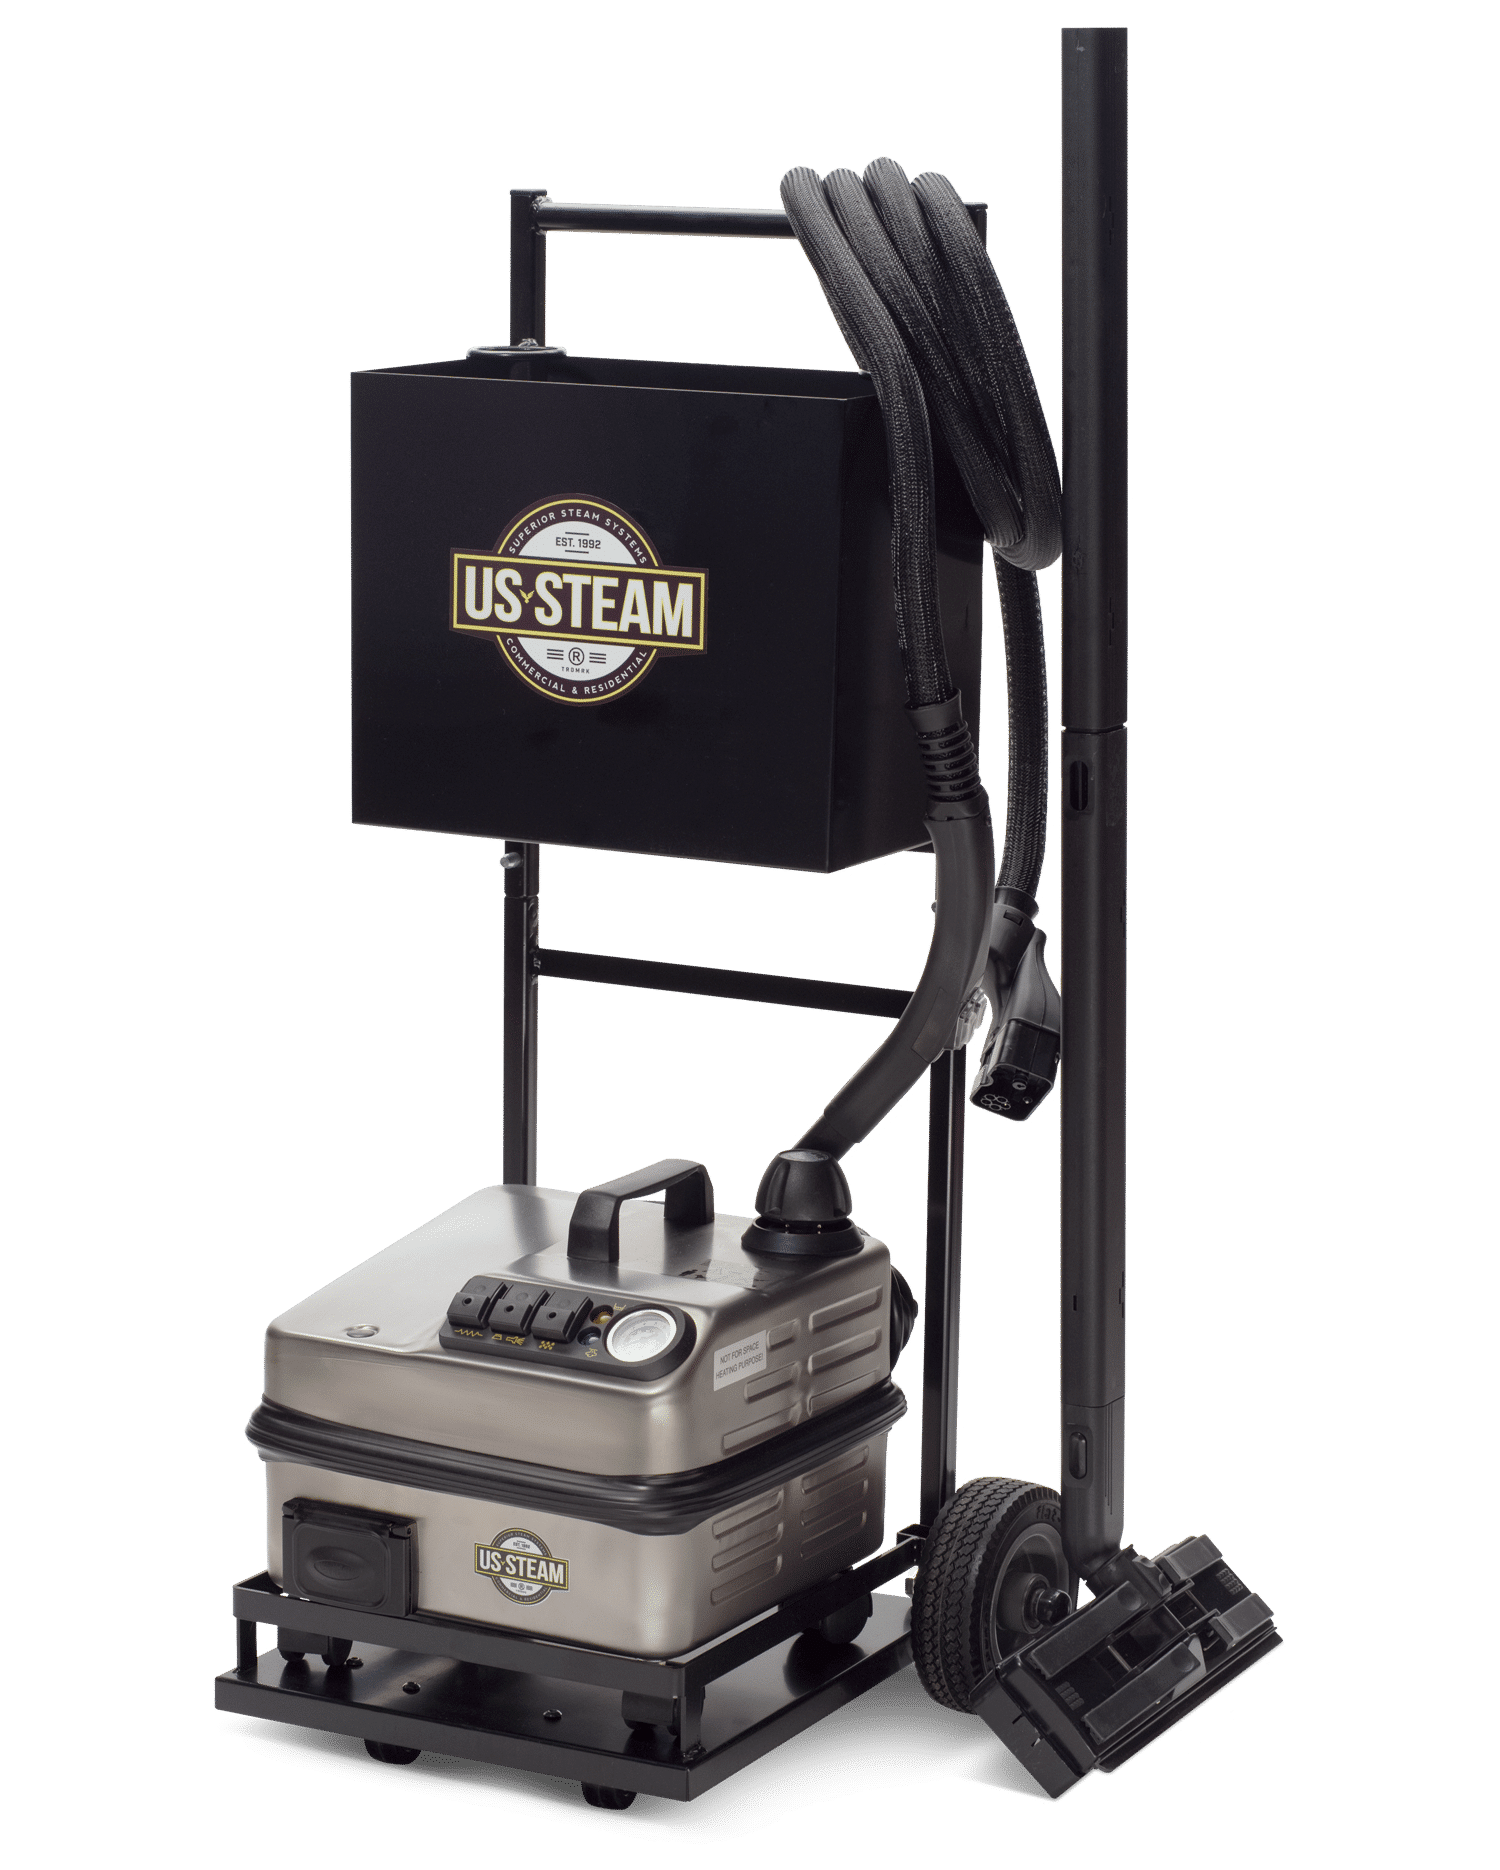 Eurosteam Tile and Grout Steam Cleaner Rental 13070 - The Home